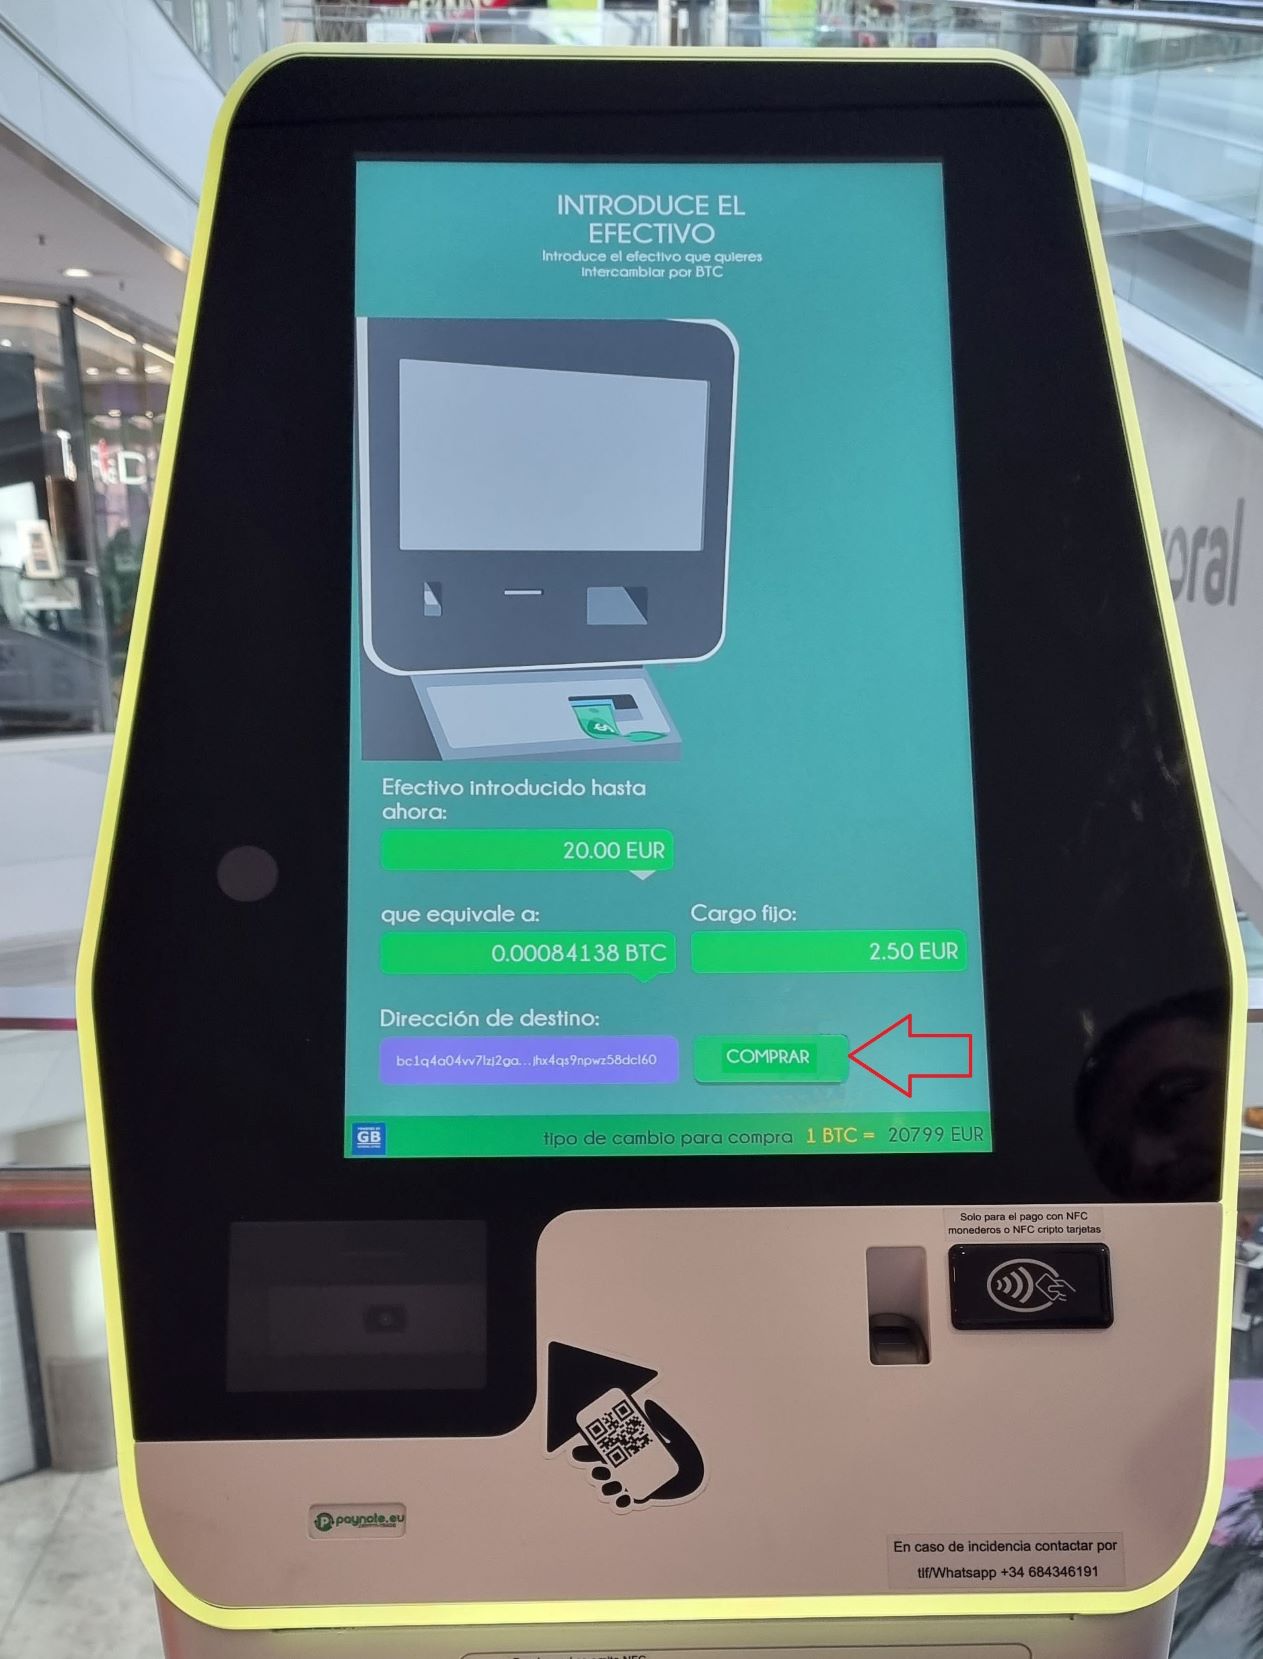 confirm the purchase of cryptocurrency at a crypto ATM